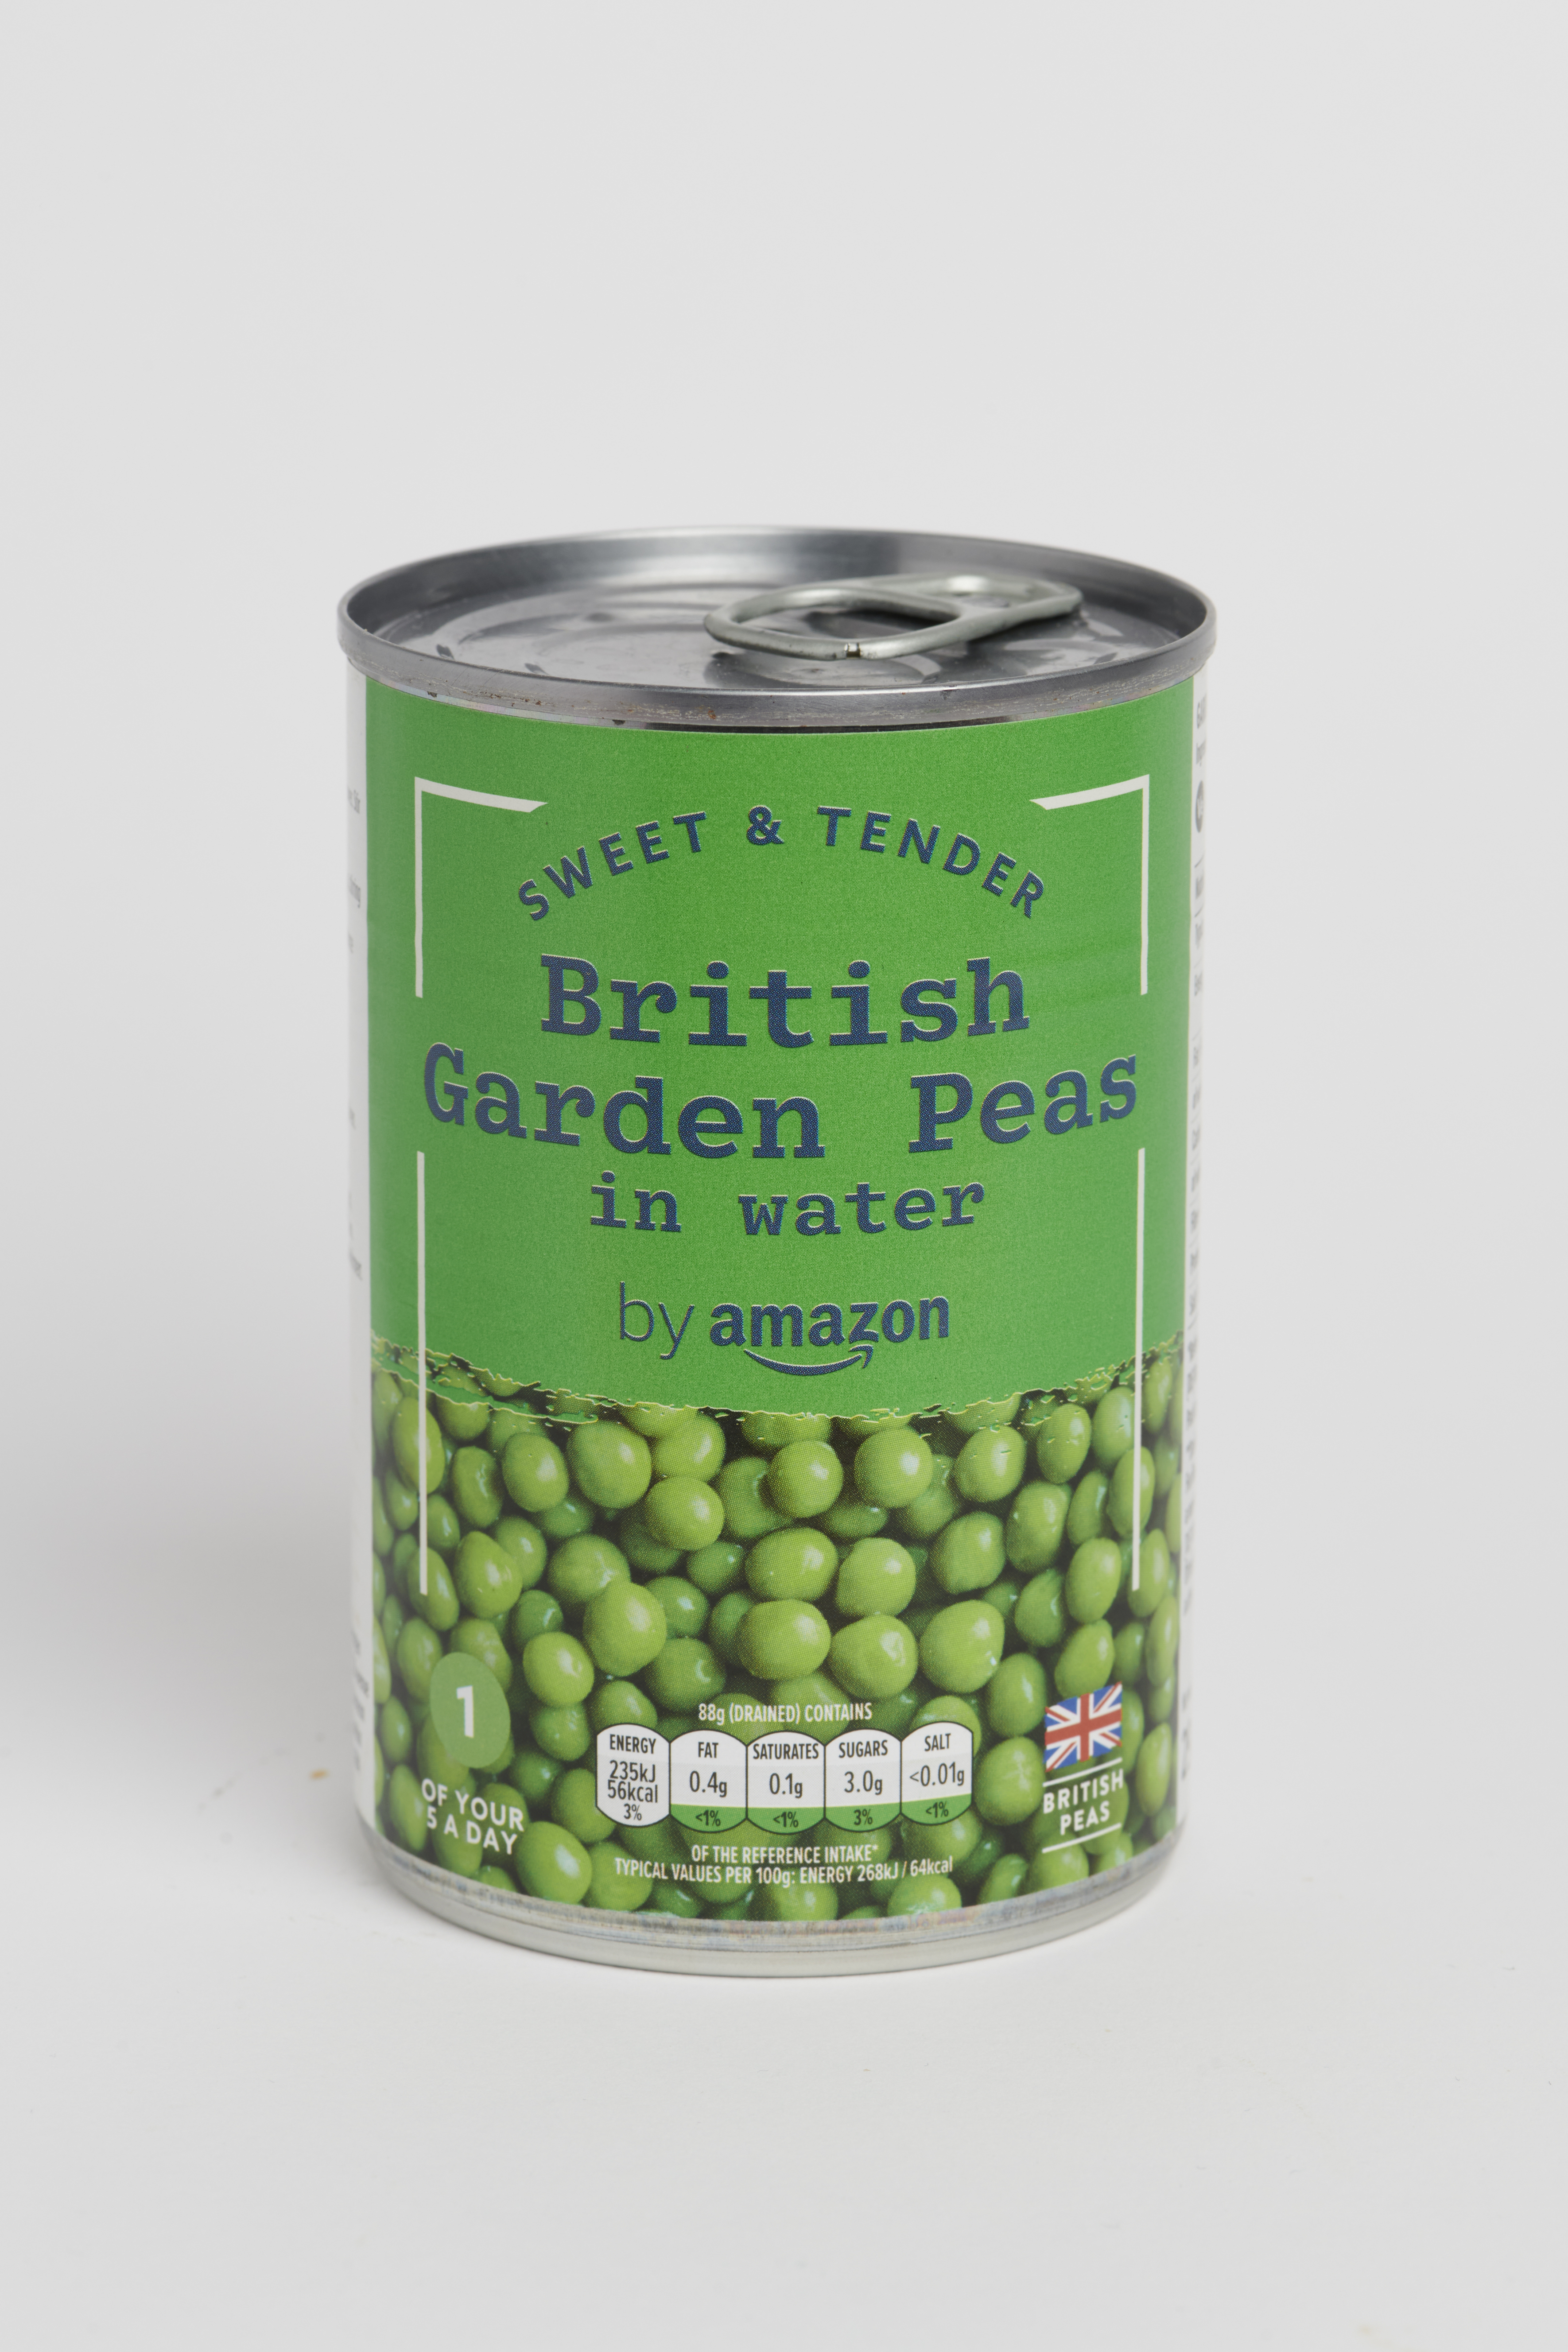 The peas from a can were also very nice